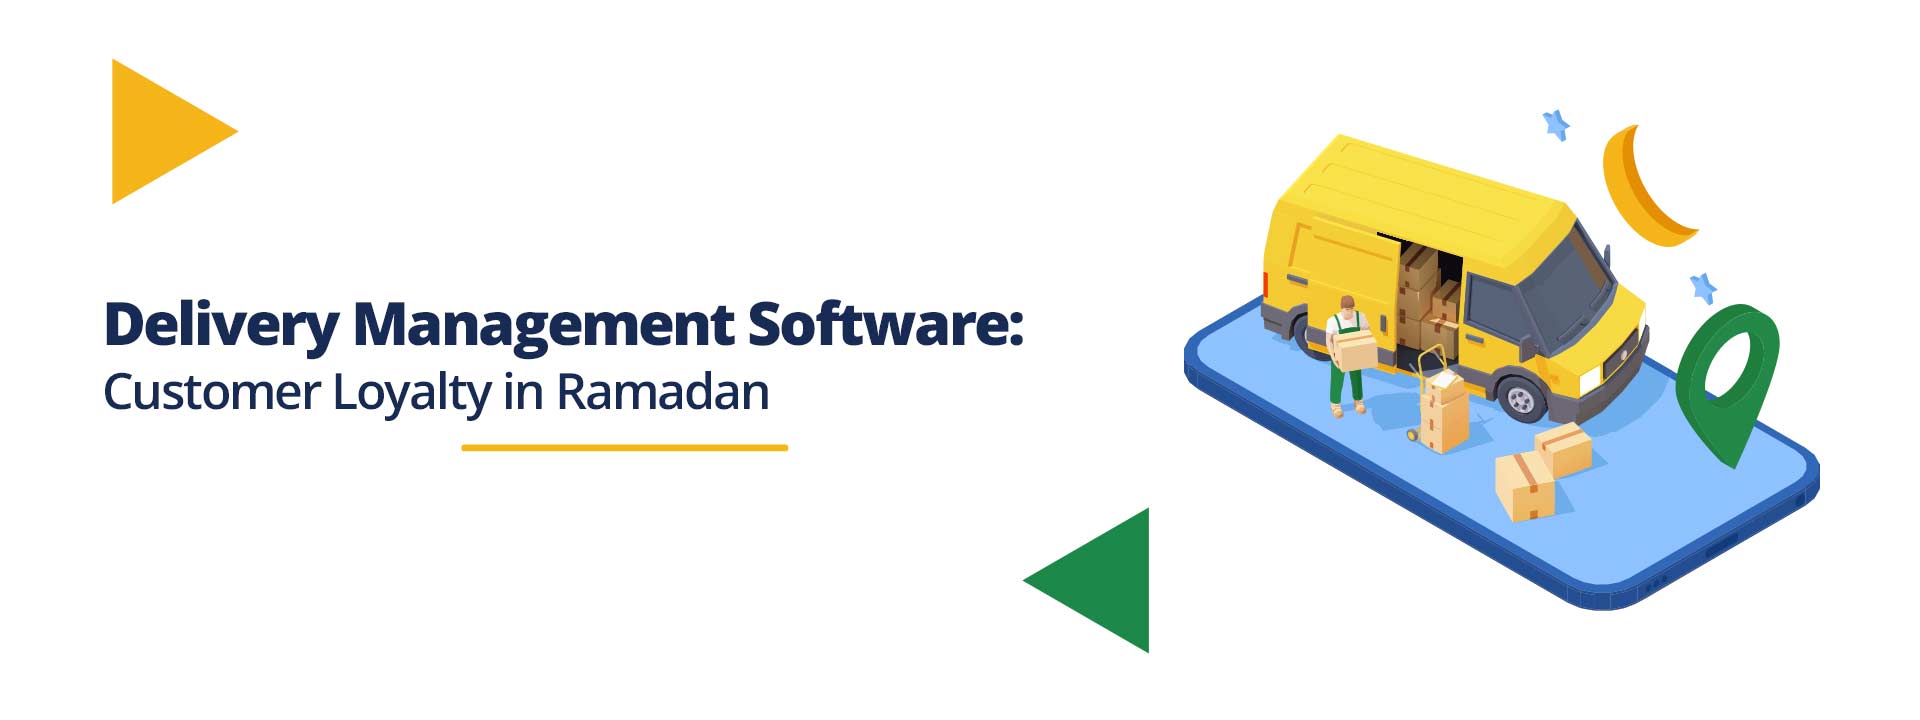 Delivery Management Software: Customer Loyalty in Ramadan